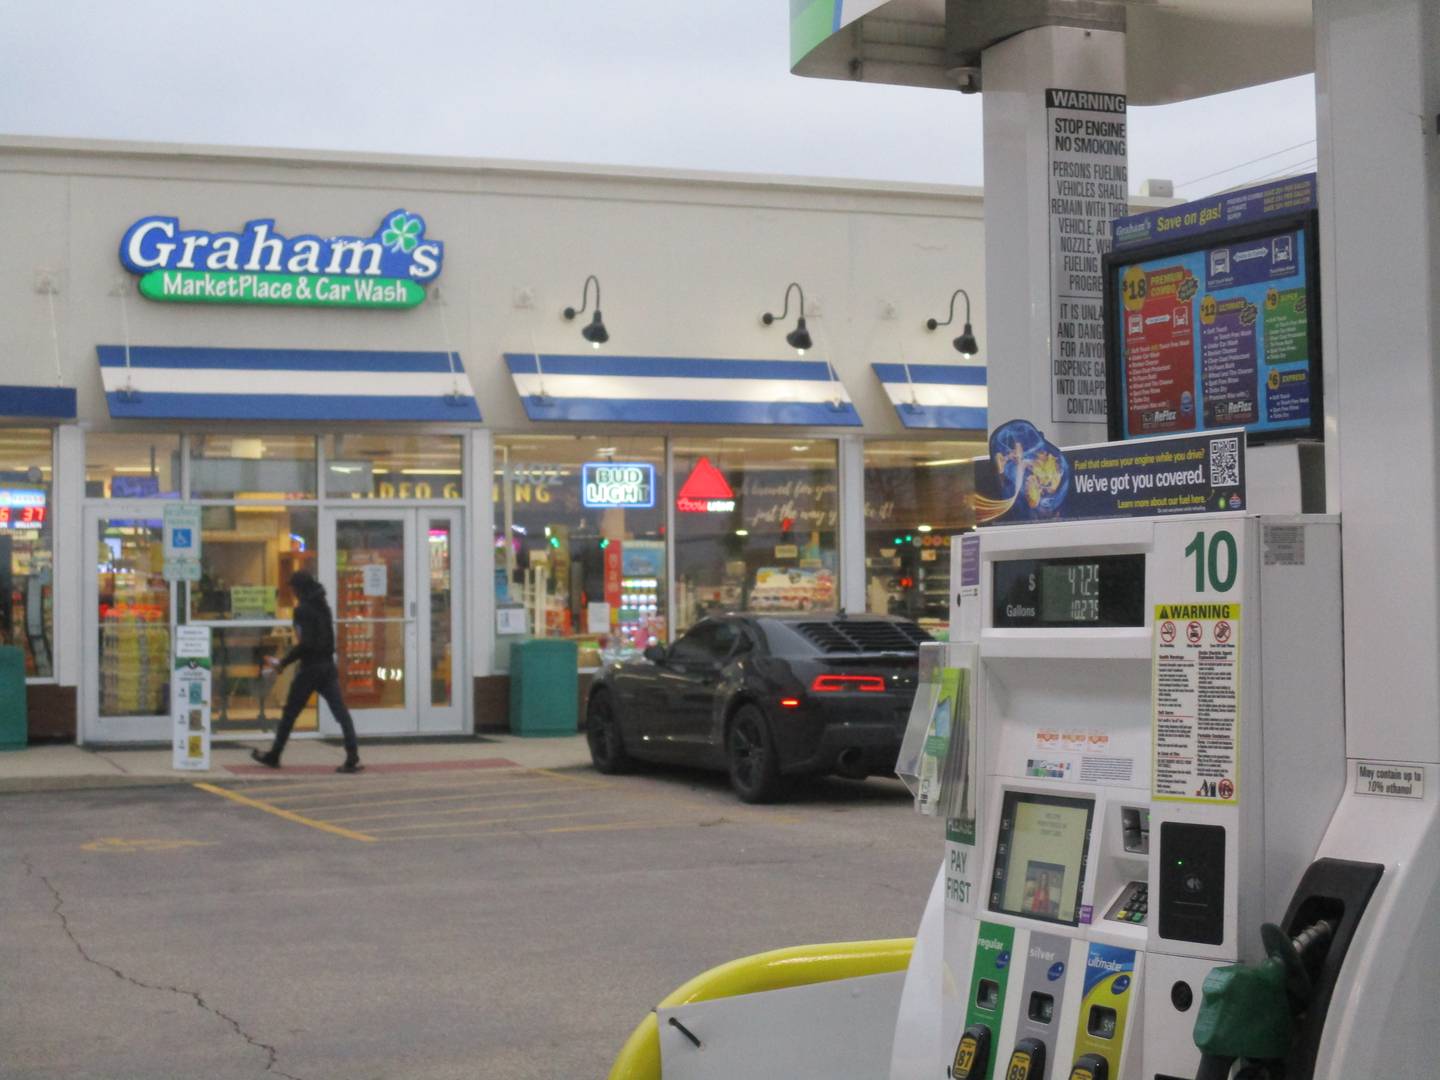 Graham's Marketplace and Car Wash, which operates this gasoline station and convenience store at the northeast corner of routes 34 and 47, is planning a new location at the northeast corner of routes 71 and 47. (Mark Foster -- mfoster@shawmedia.com)